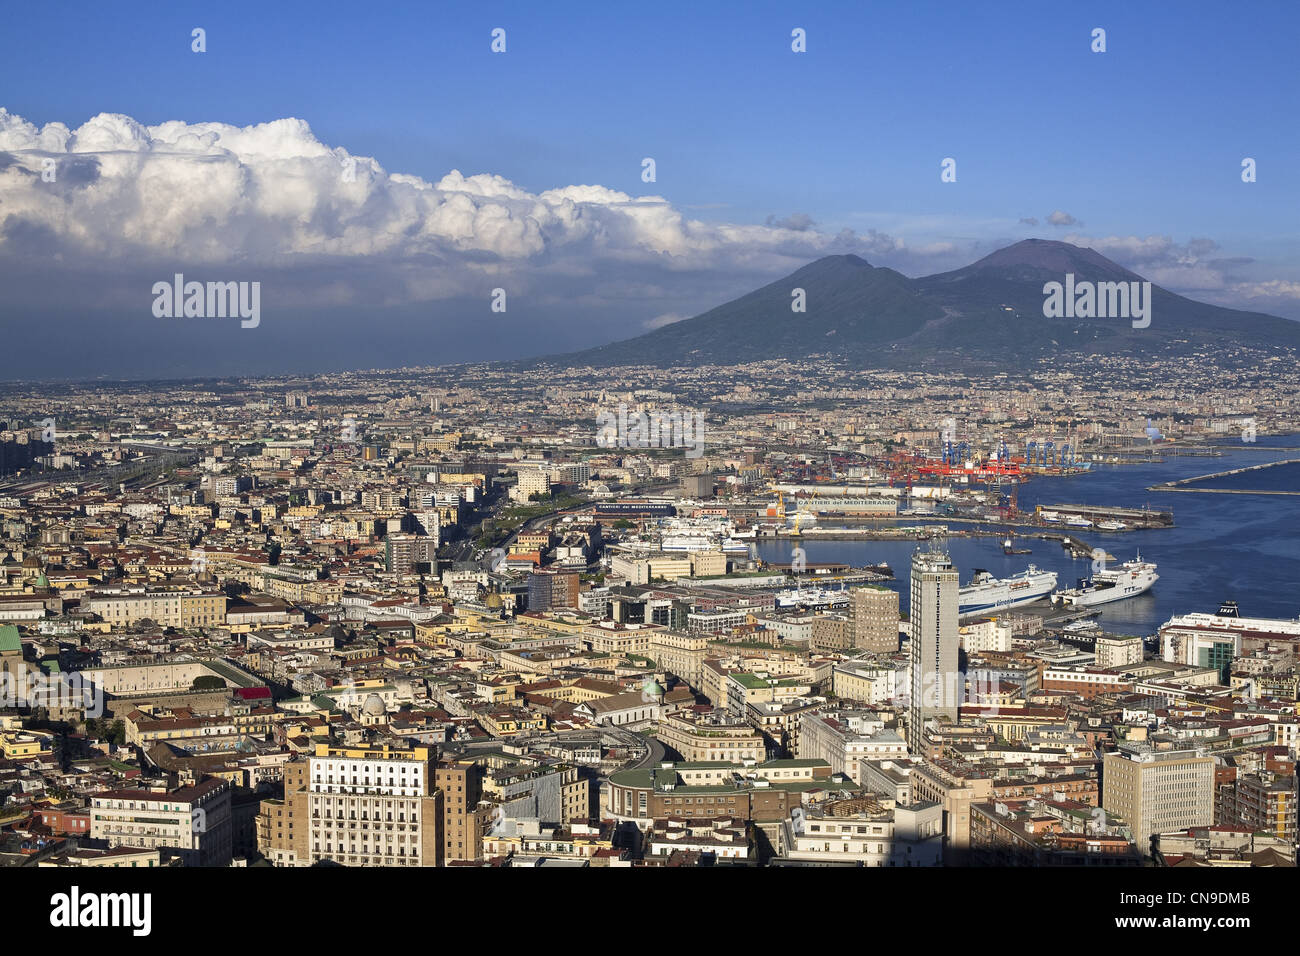 Italy, Campania, Naples, view over the Historic center (listed as World Heritage by UNESCO), Mount Vesuvius and the harbour Stock Photo